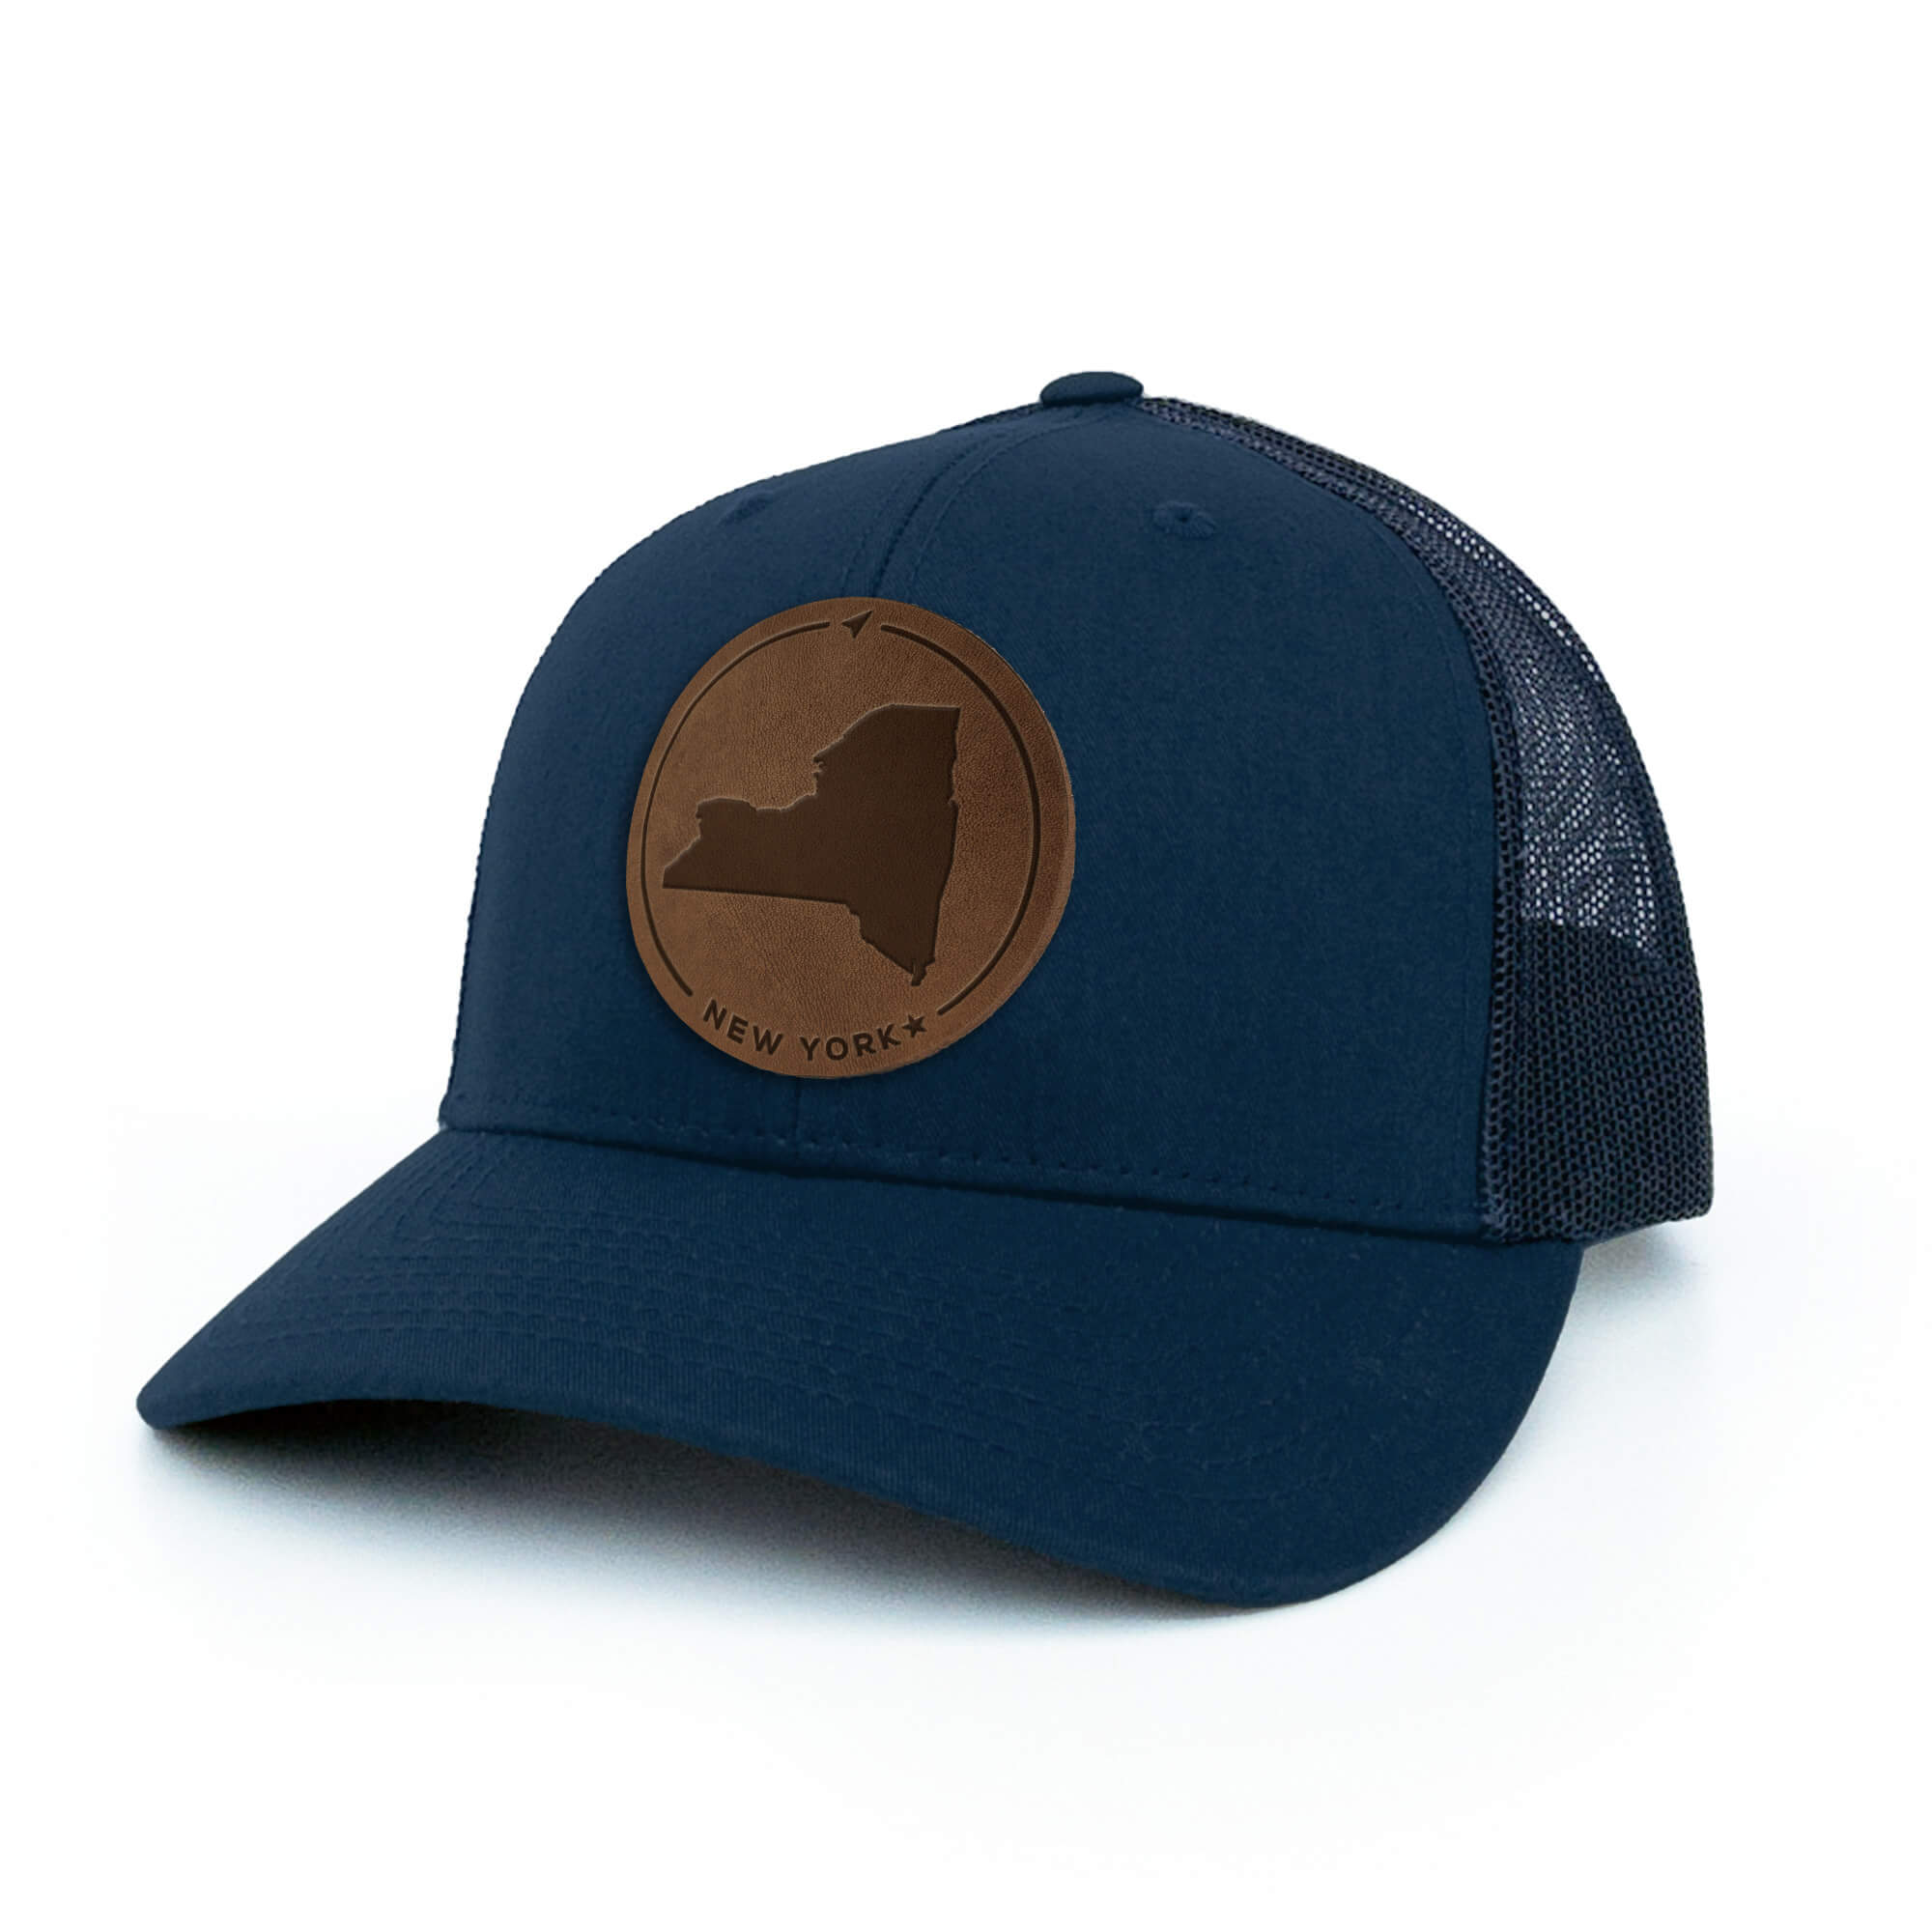 Navy trucker hat with full-grain leather patch of New York | BLACK-003-006, CHARC-003-006, NAVY-003-006, HGREY-003-006, MOSS-003-006, BROWN-003-006